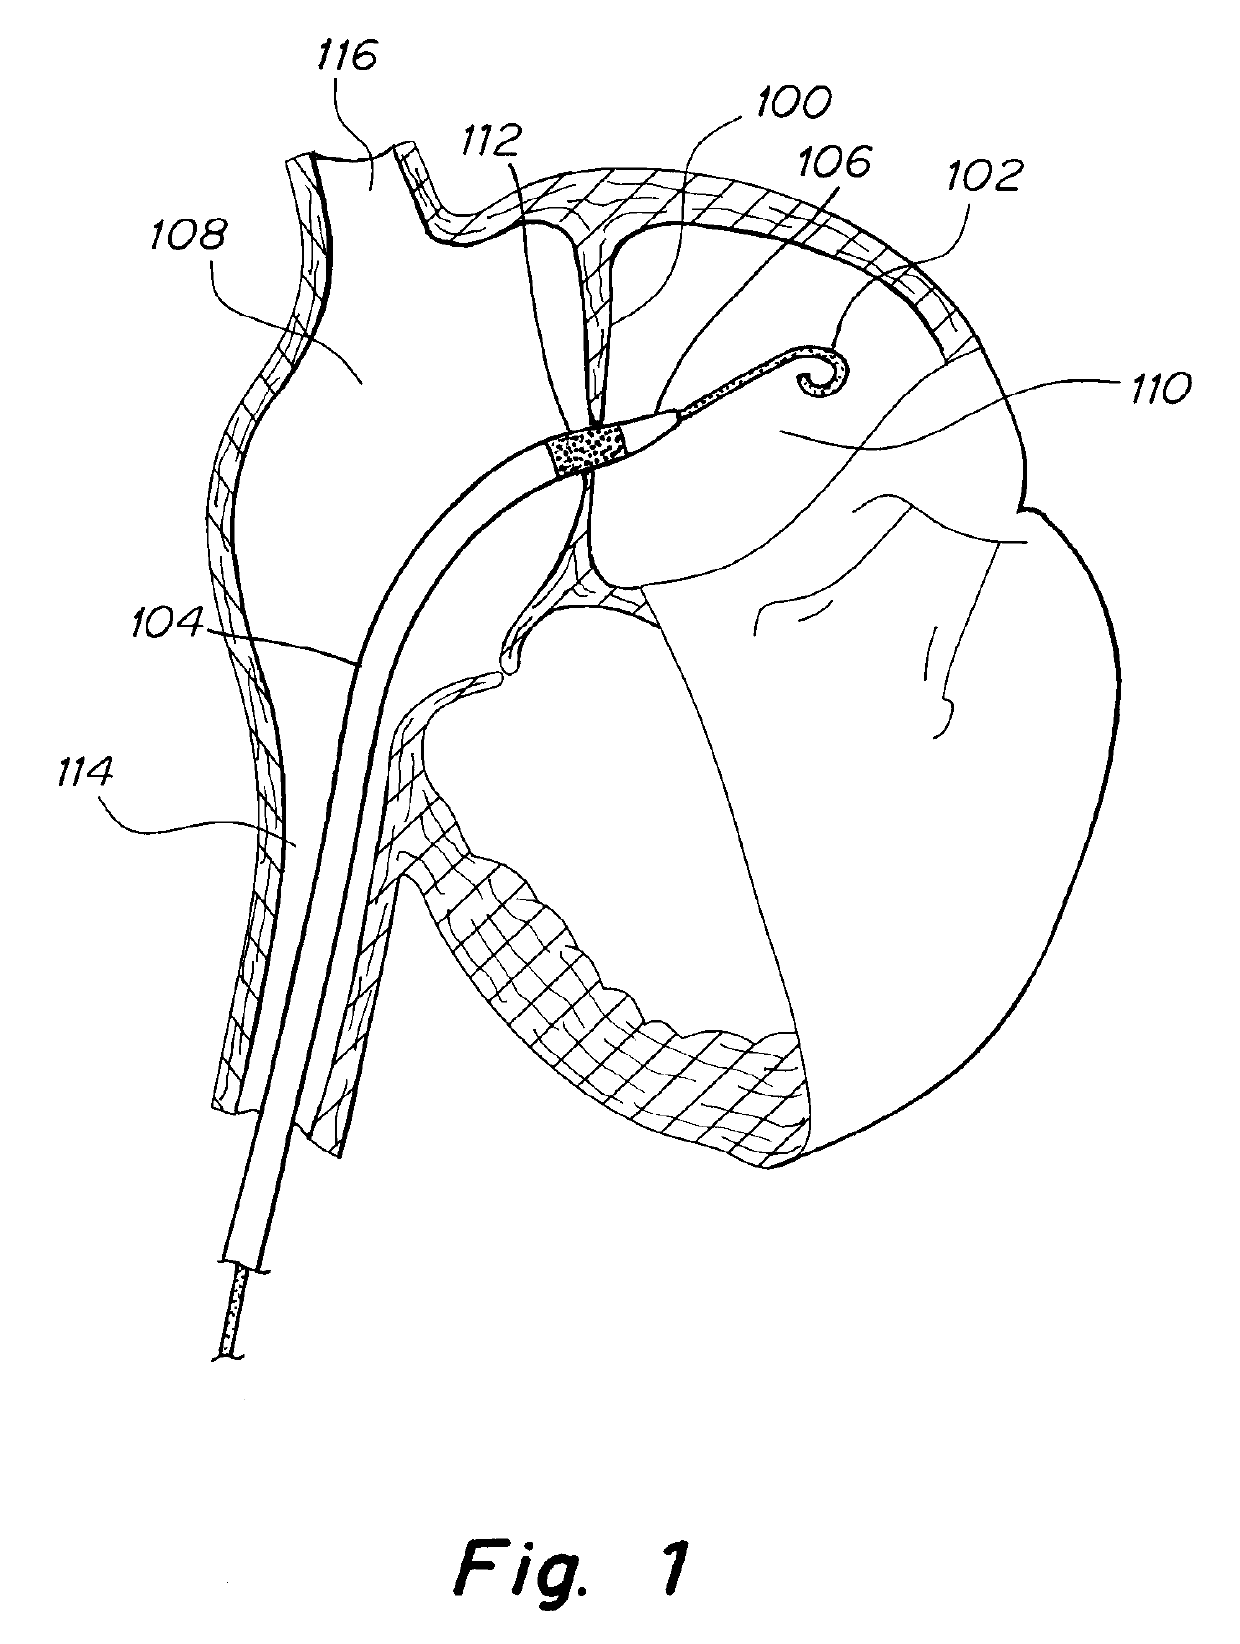 Apparatus and methods to create and maintain an intra-atrial pressure relief opening